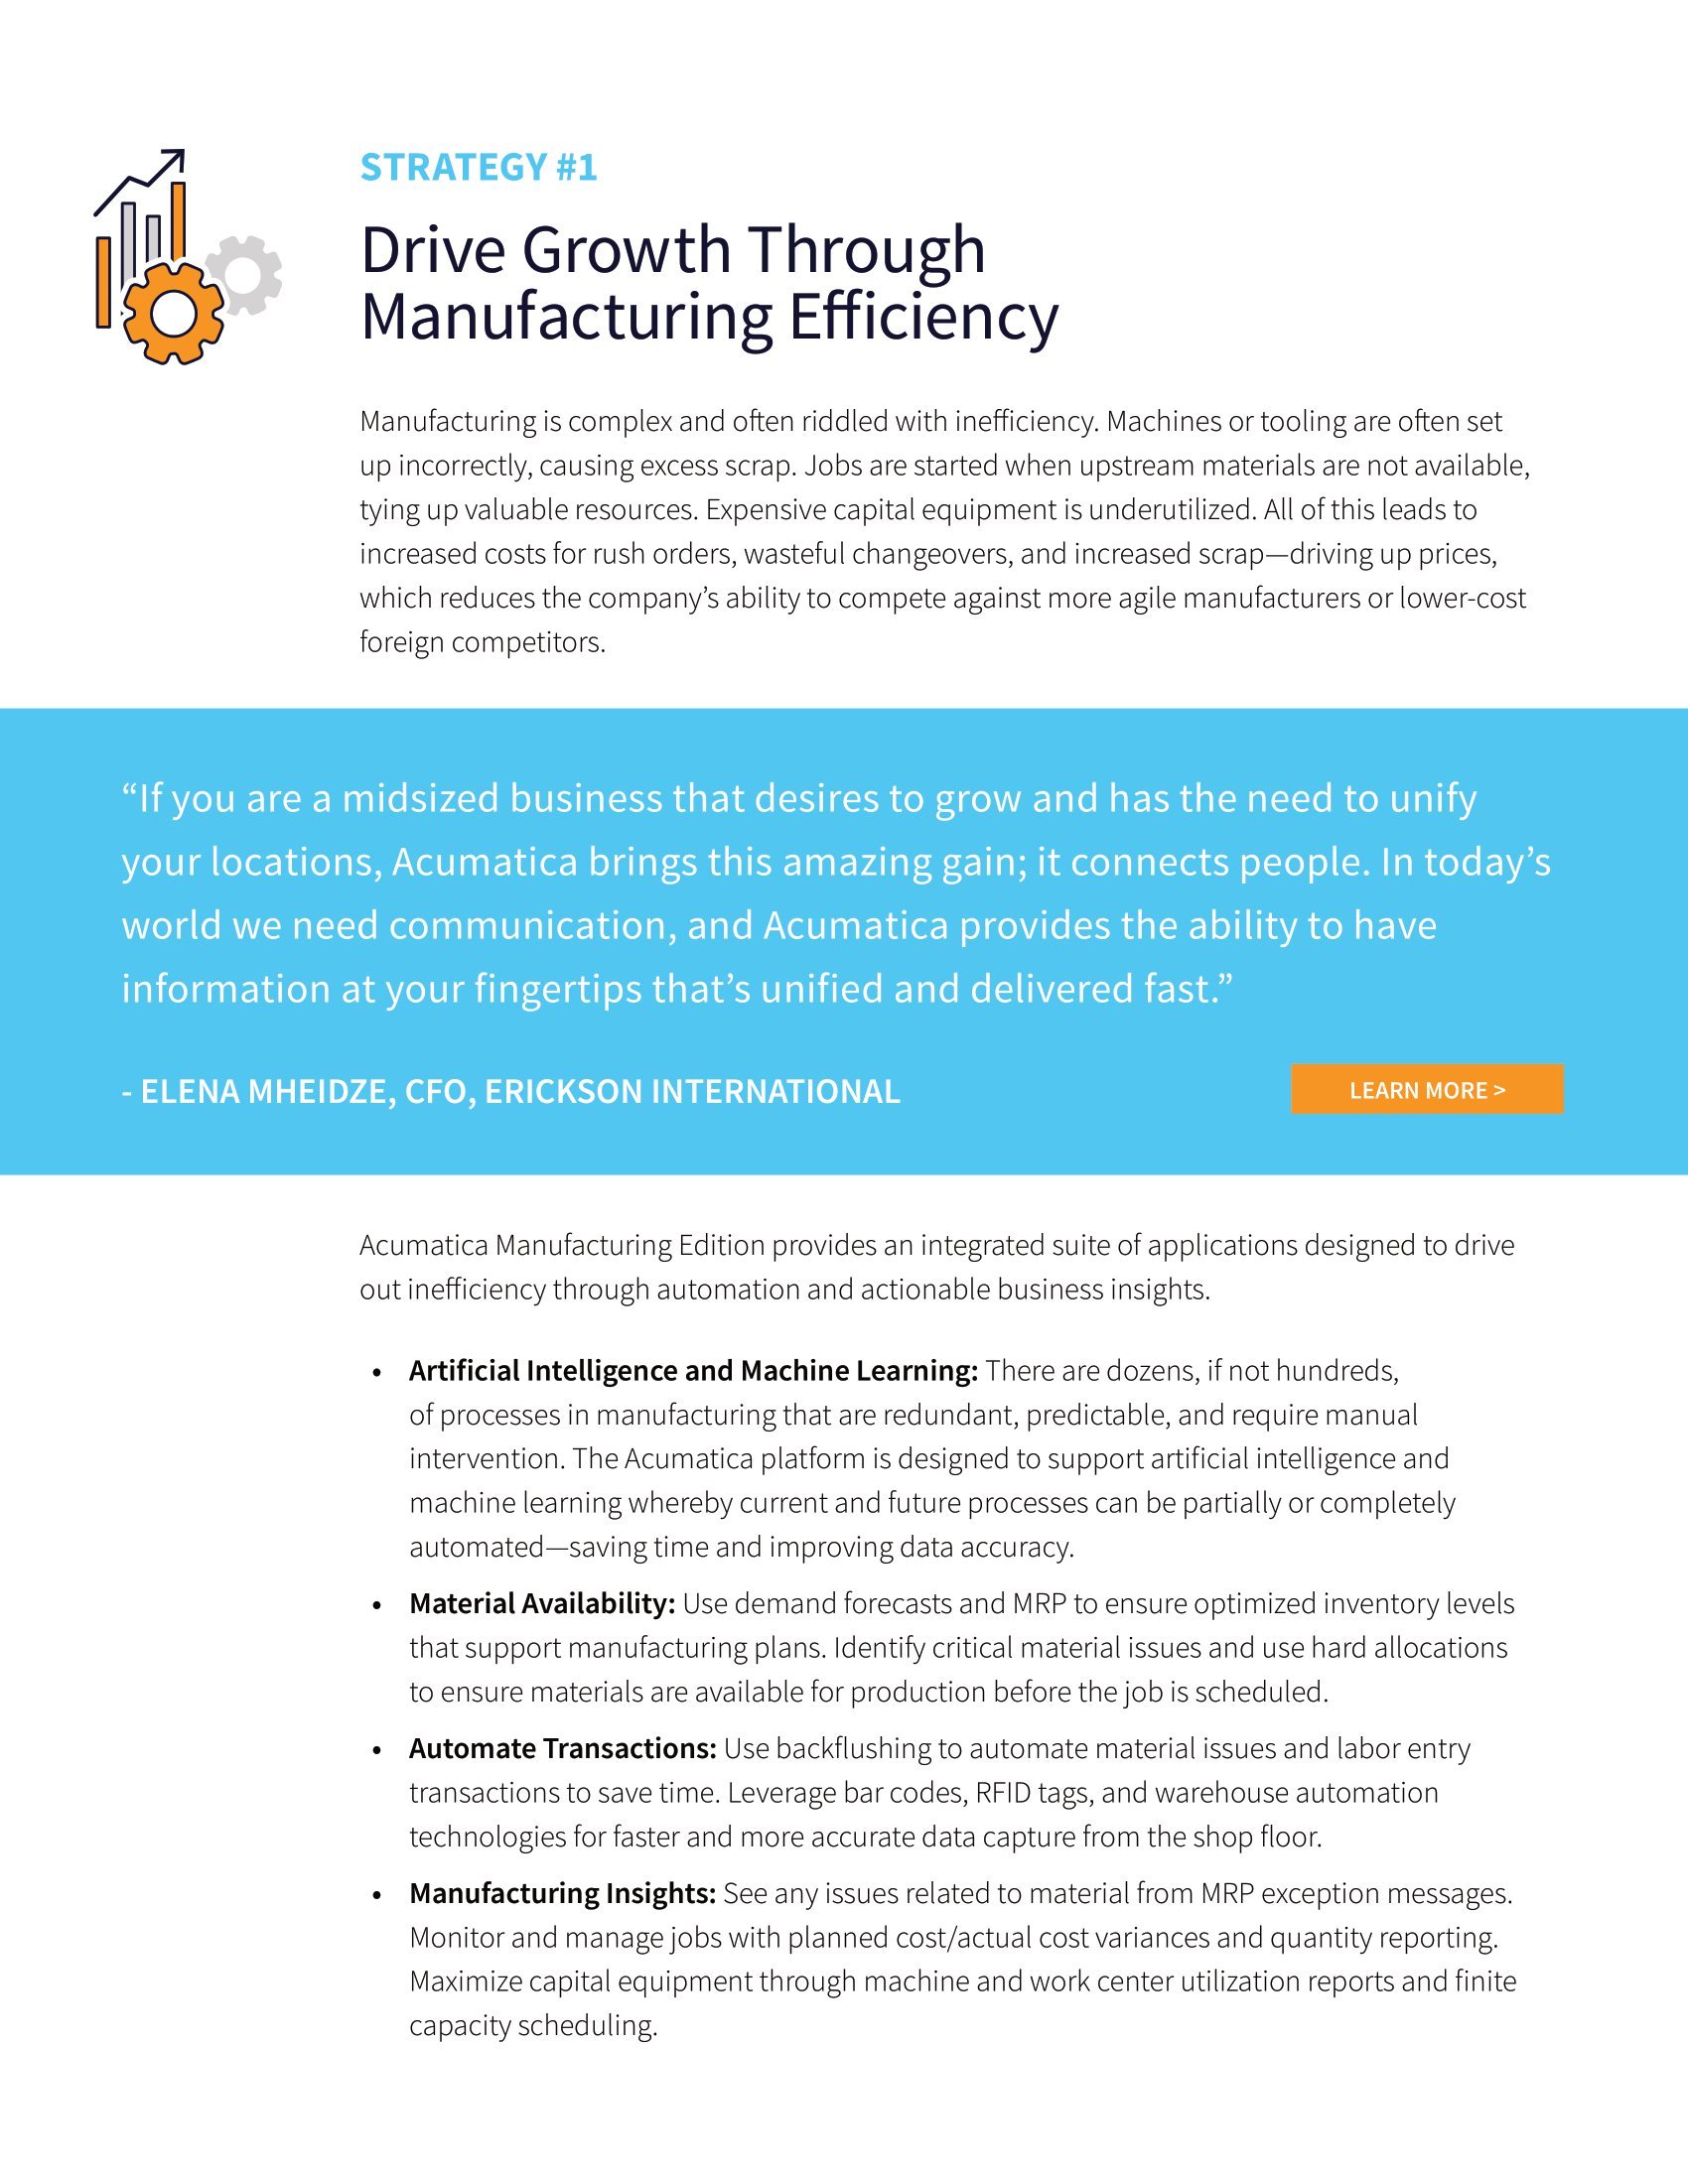 Nine Ways to Drive Manufacturing Growth in a Digital Economy, page 1